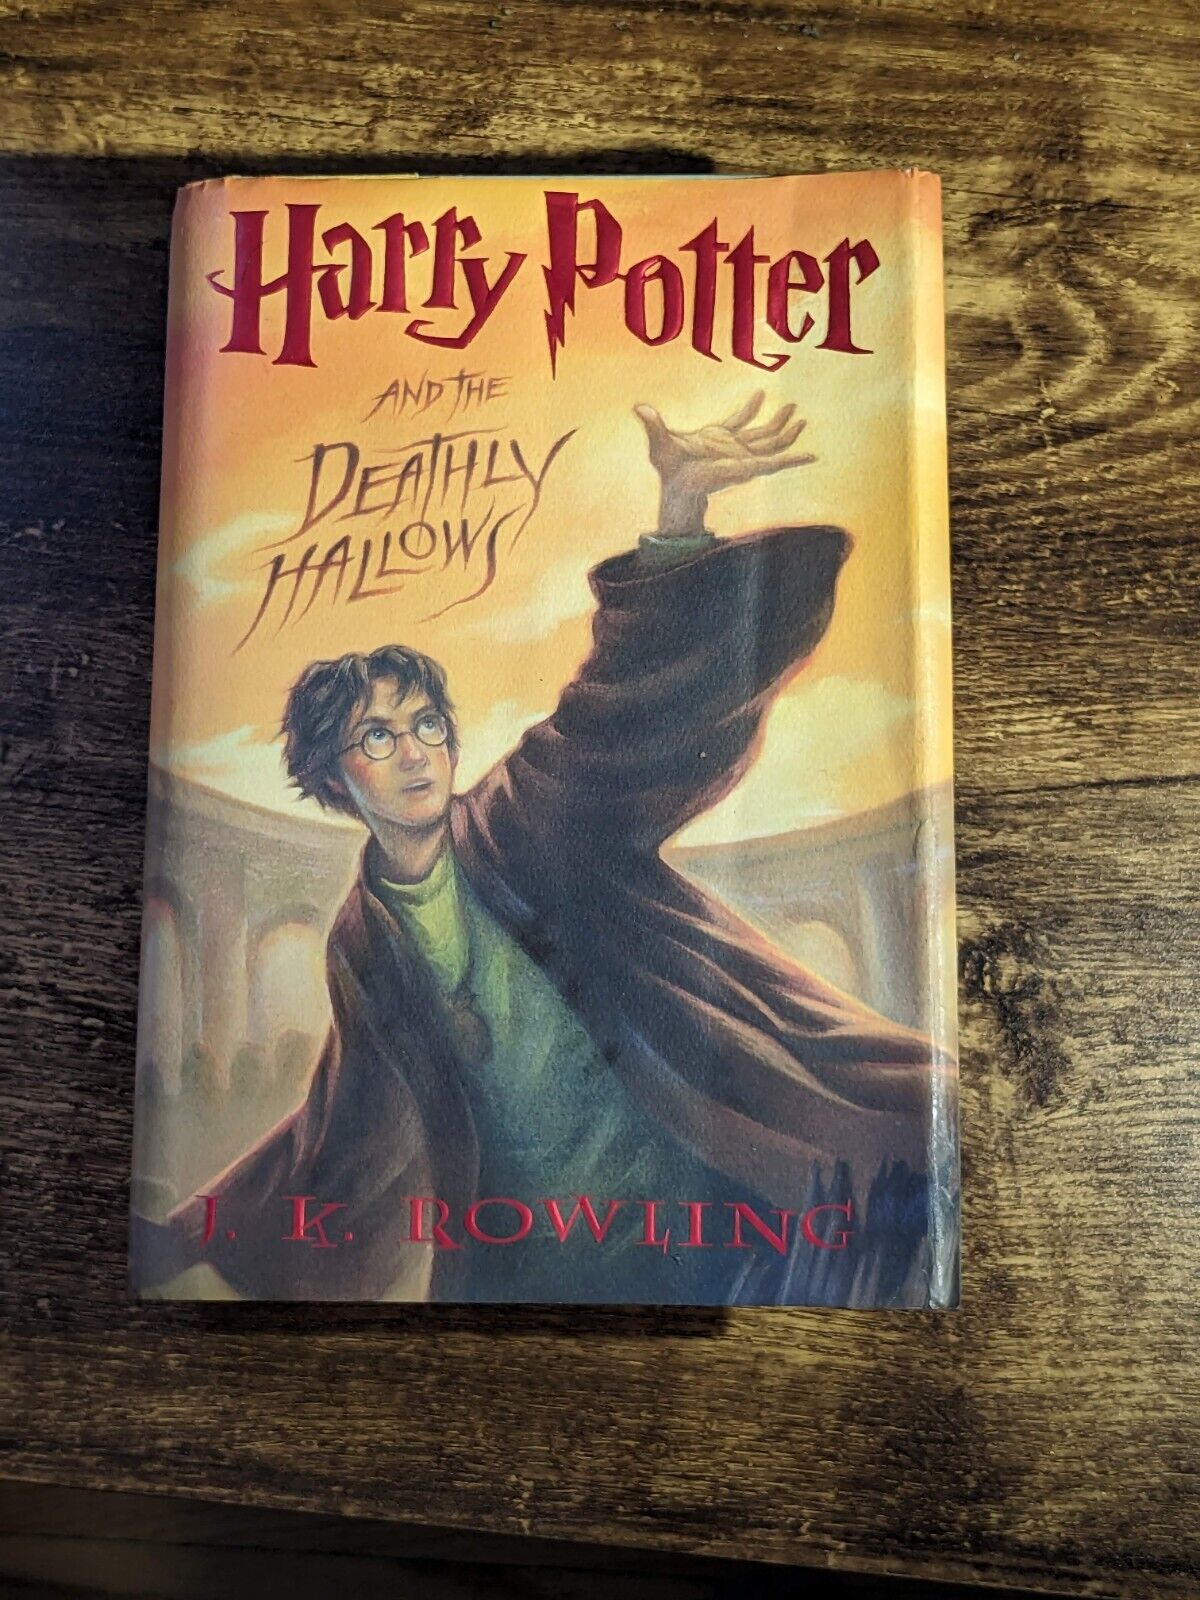 Harry Potter and the Deathly Hallows - J.K. Rowling First Print Edition Hardcover - Asylum Books